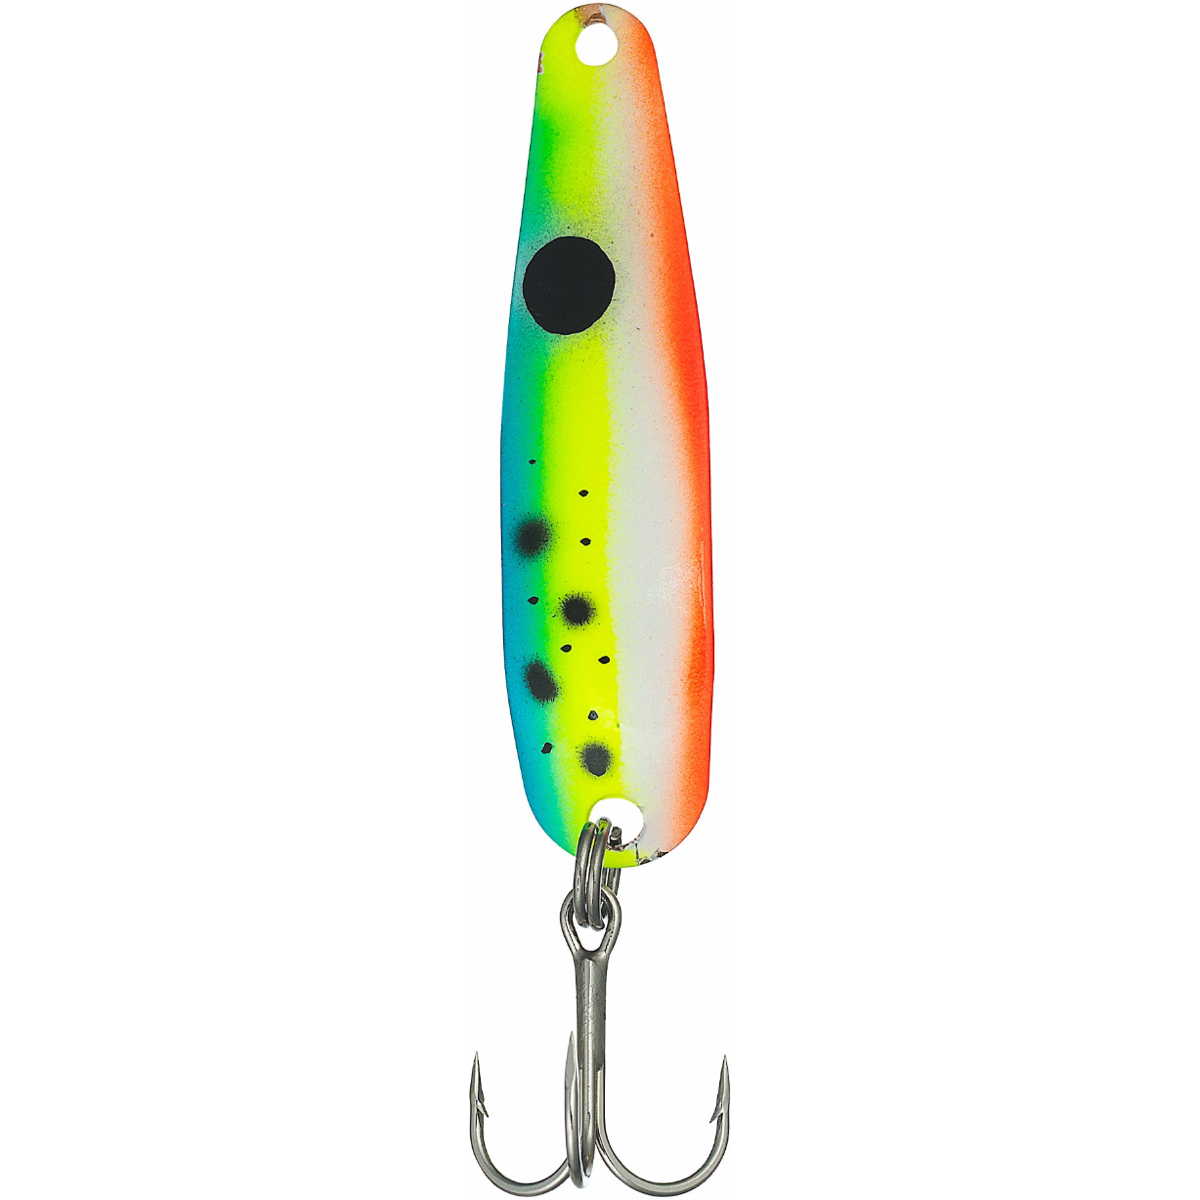 Photo of Advance Tackle Michigan Stinger Scorpion Spoon - Premium for sale at United Tackle Shops.